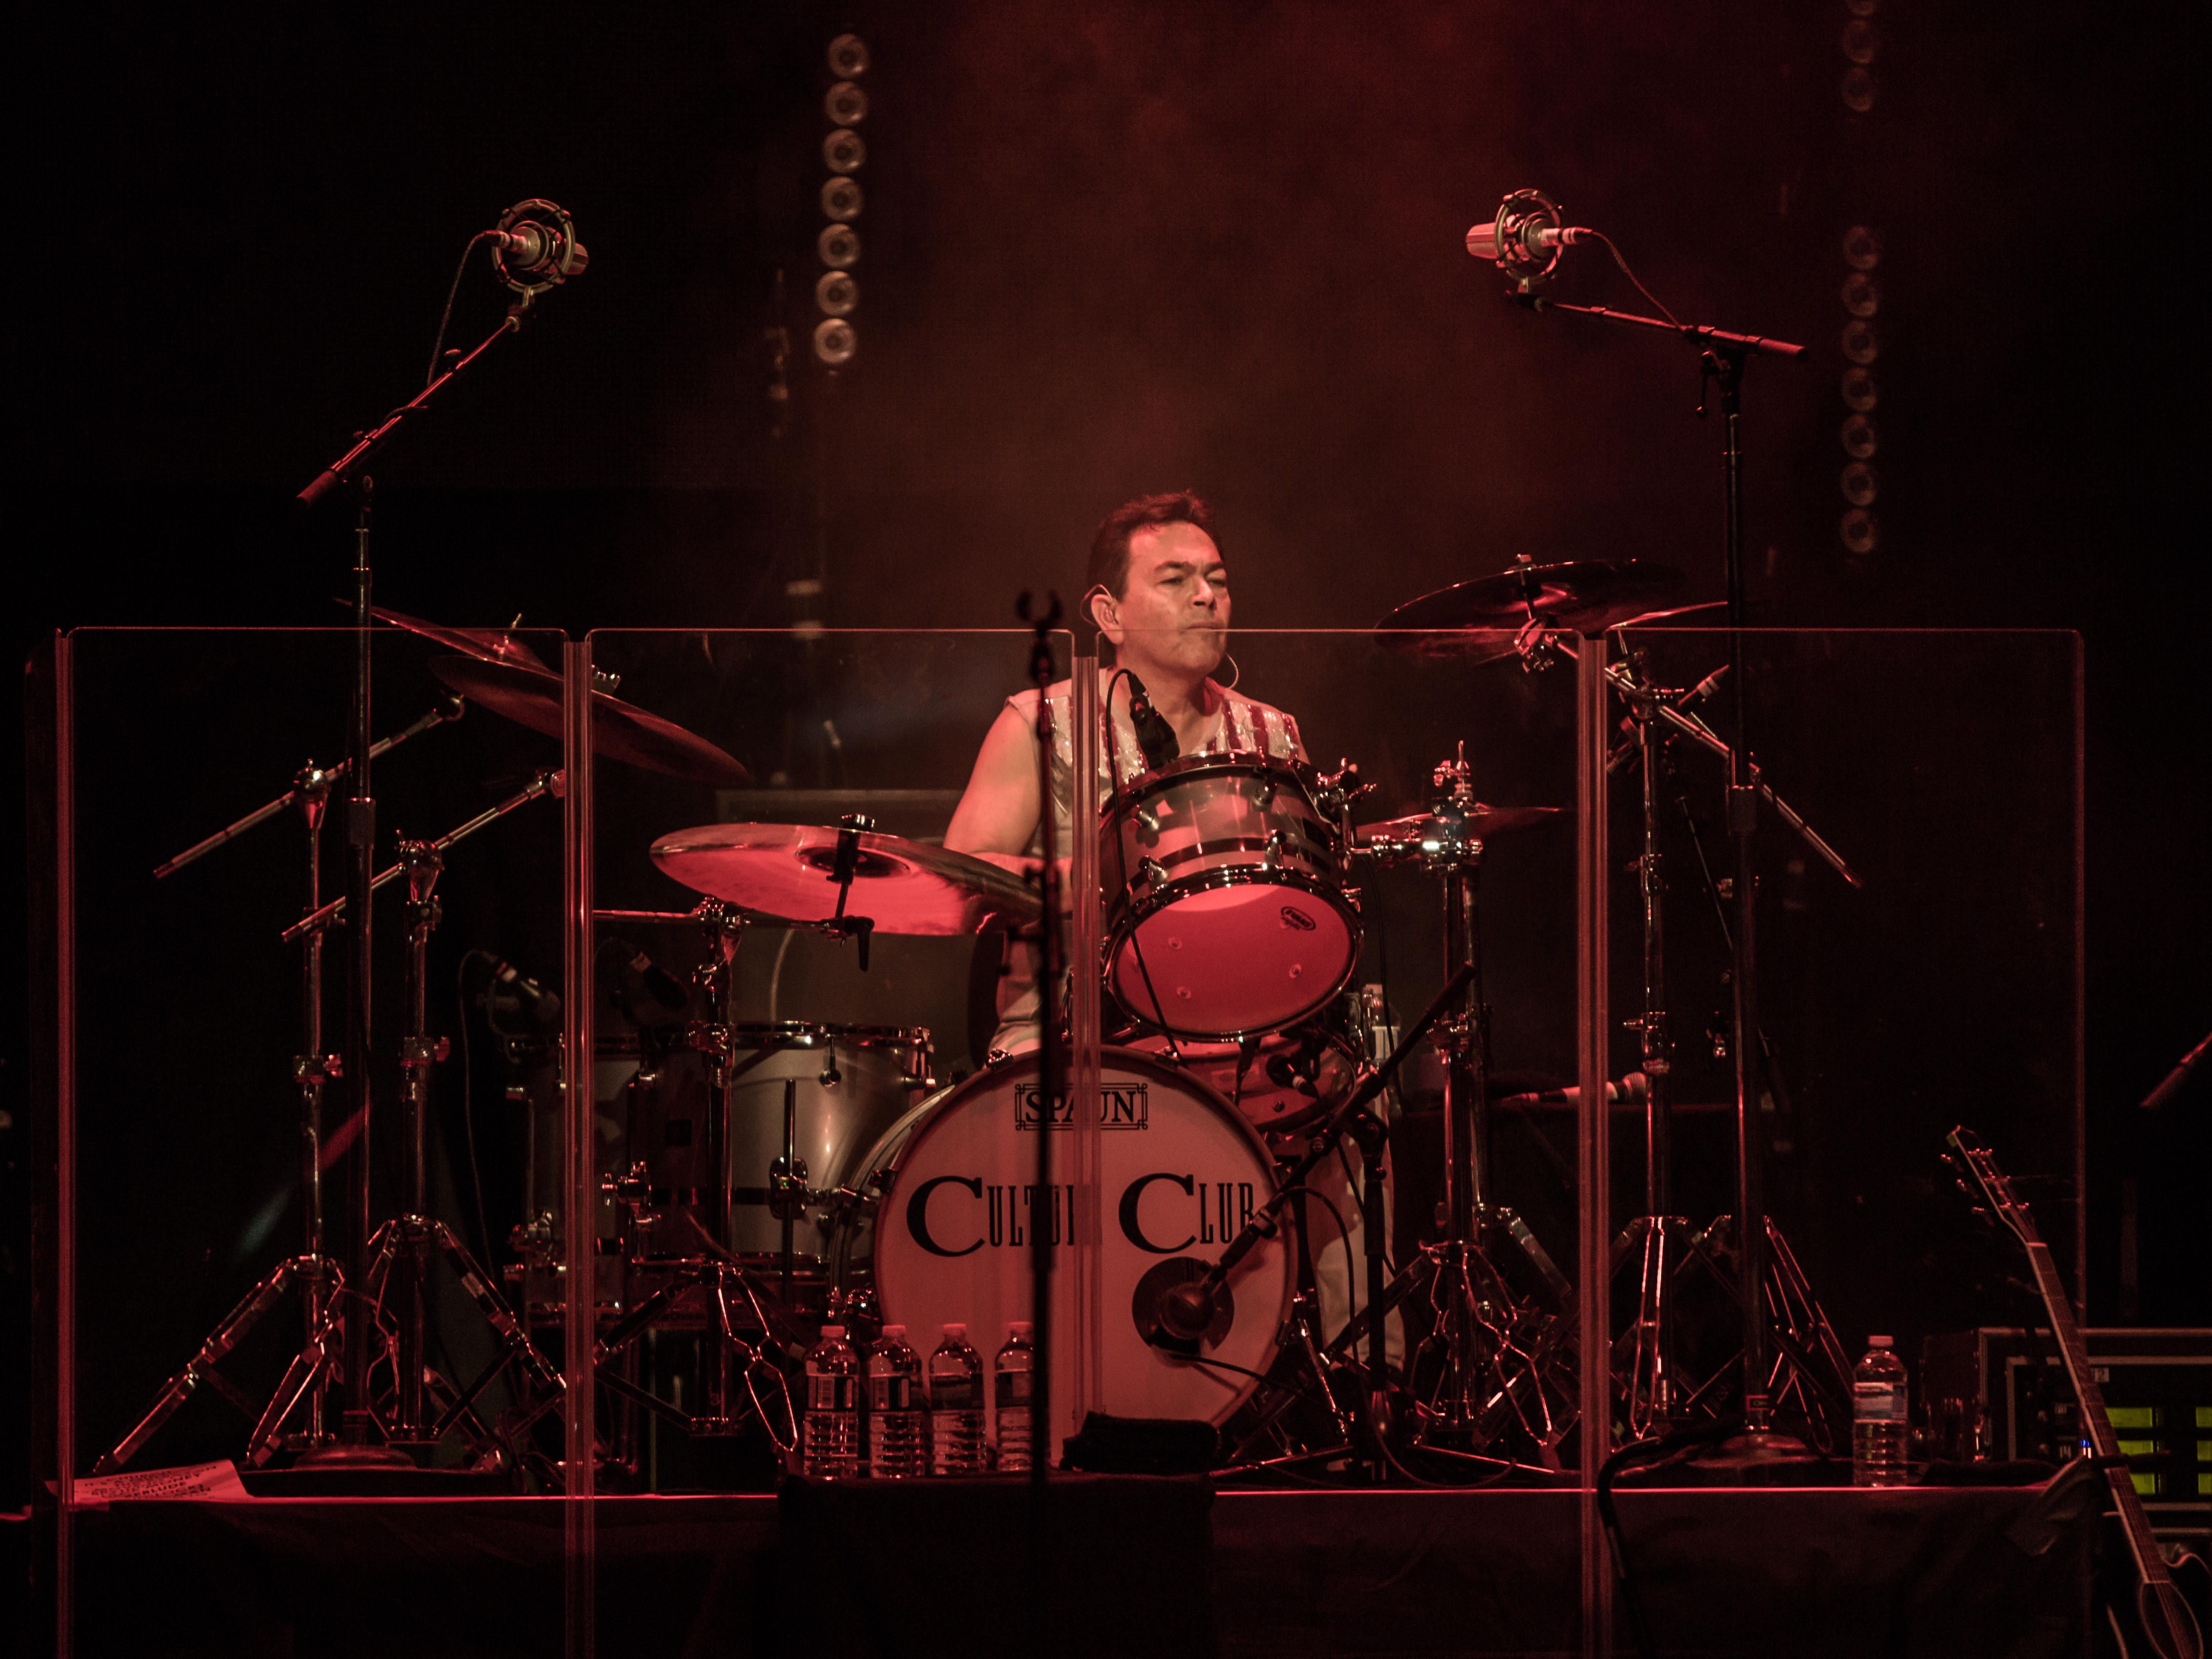 Jon Moss performing with Culture Club in 2016